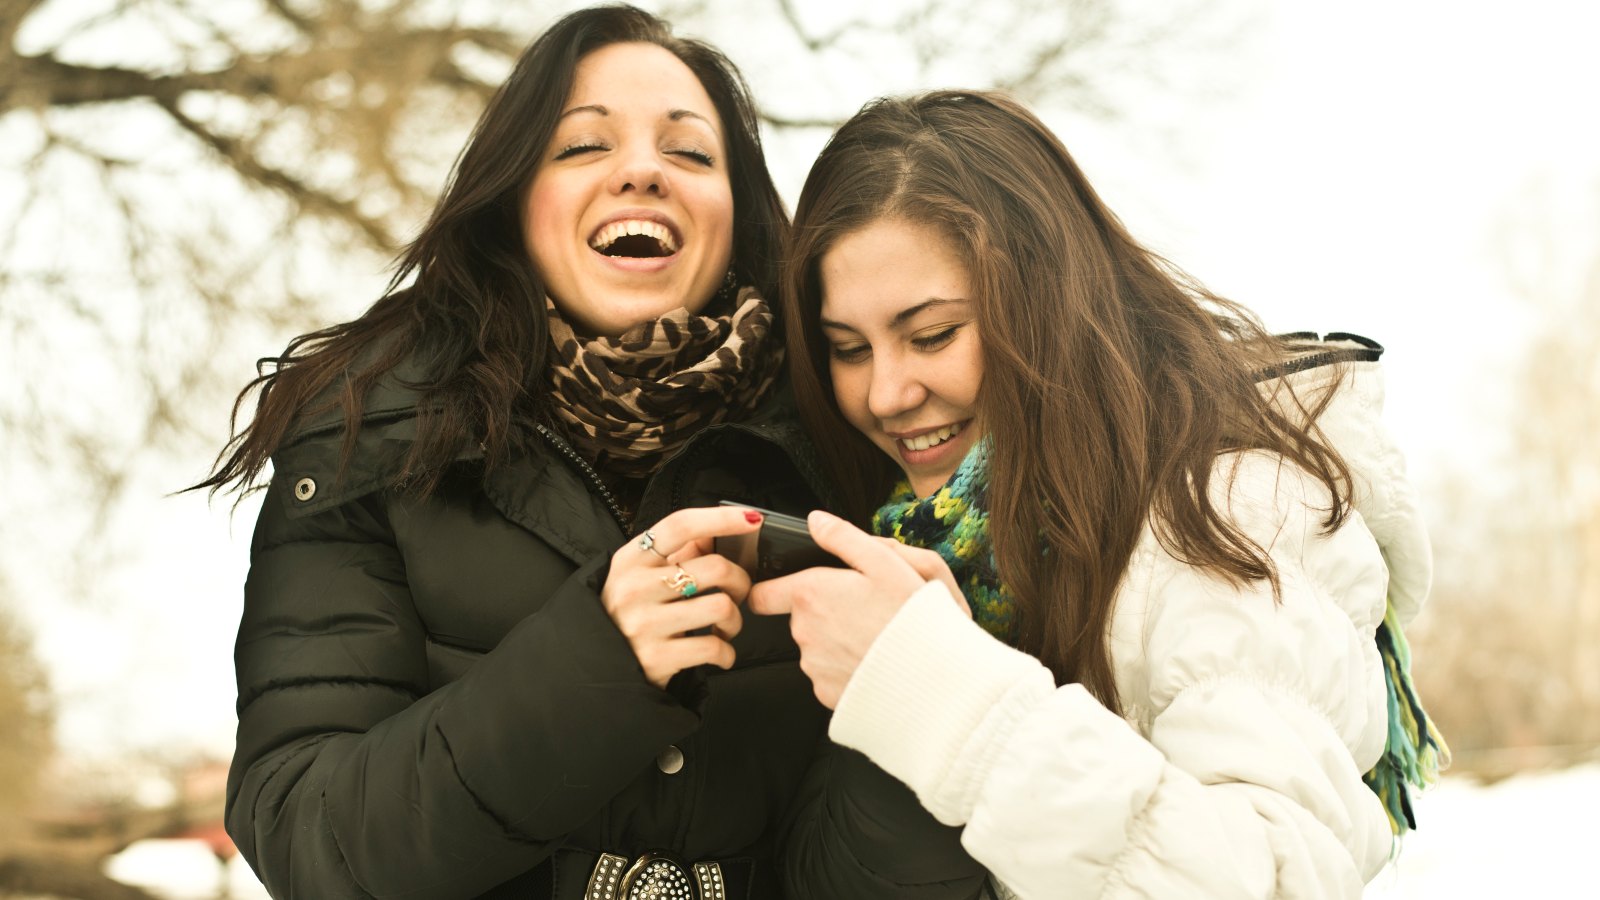 Two young women laughing at mobile phone in park in winter